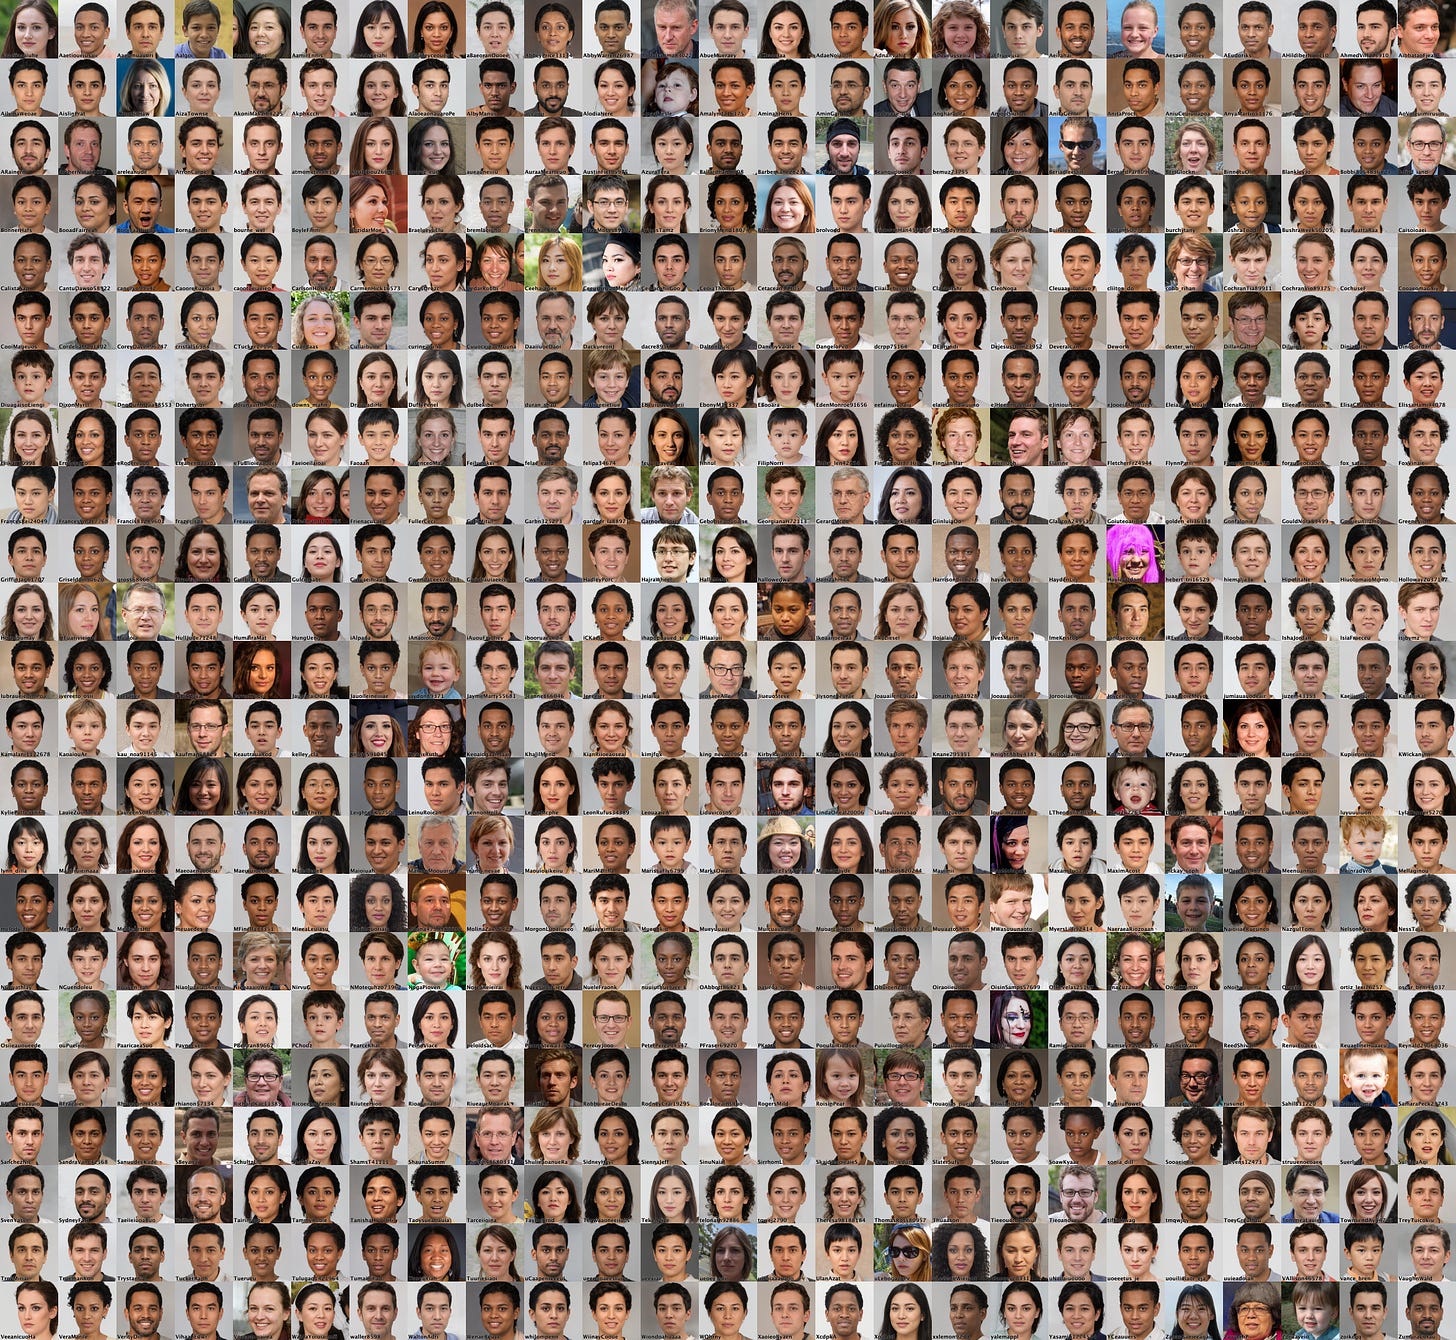 collage of the GAN-generated faces that the accounts in the network use as profile images